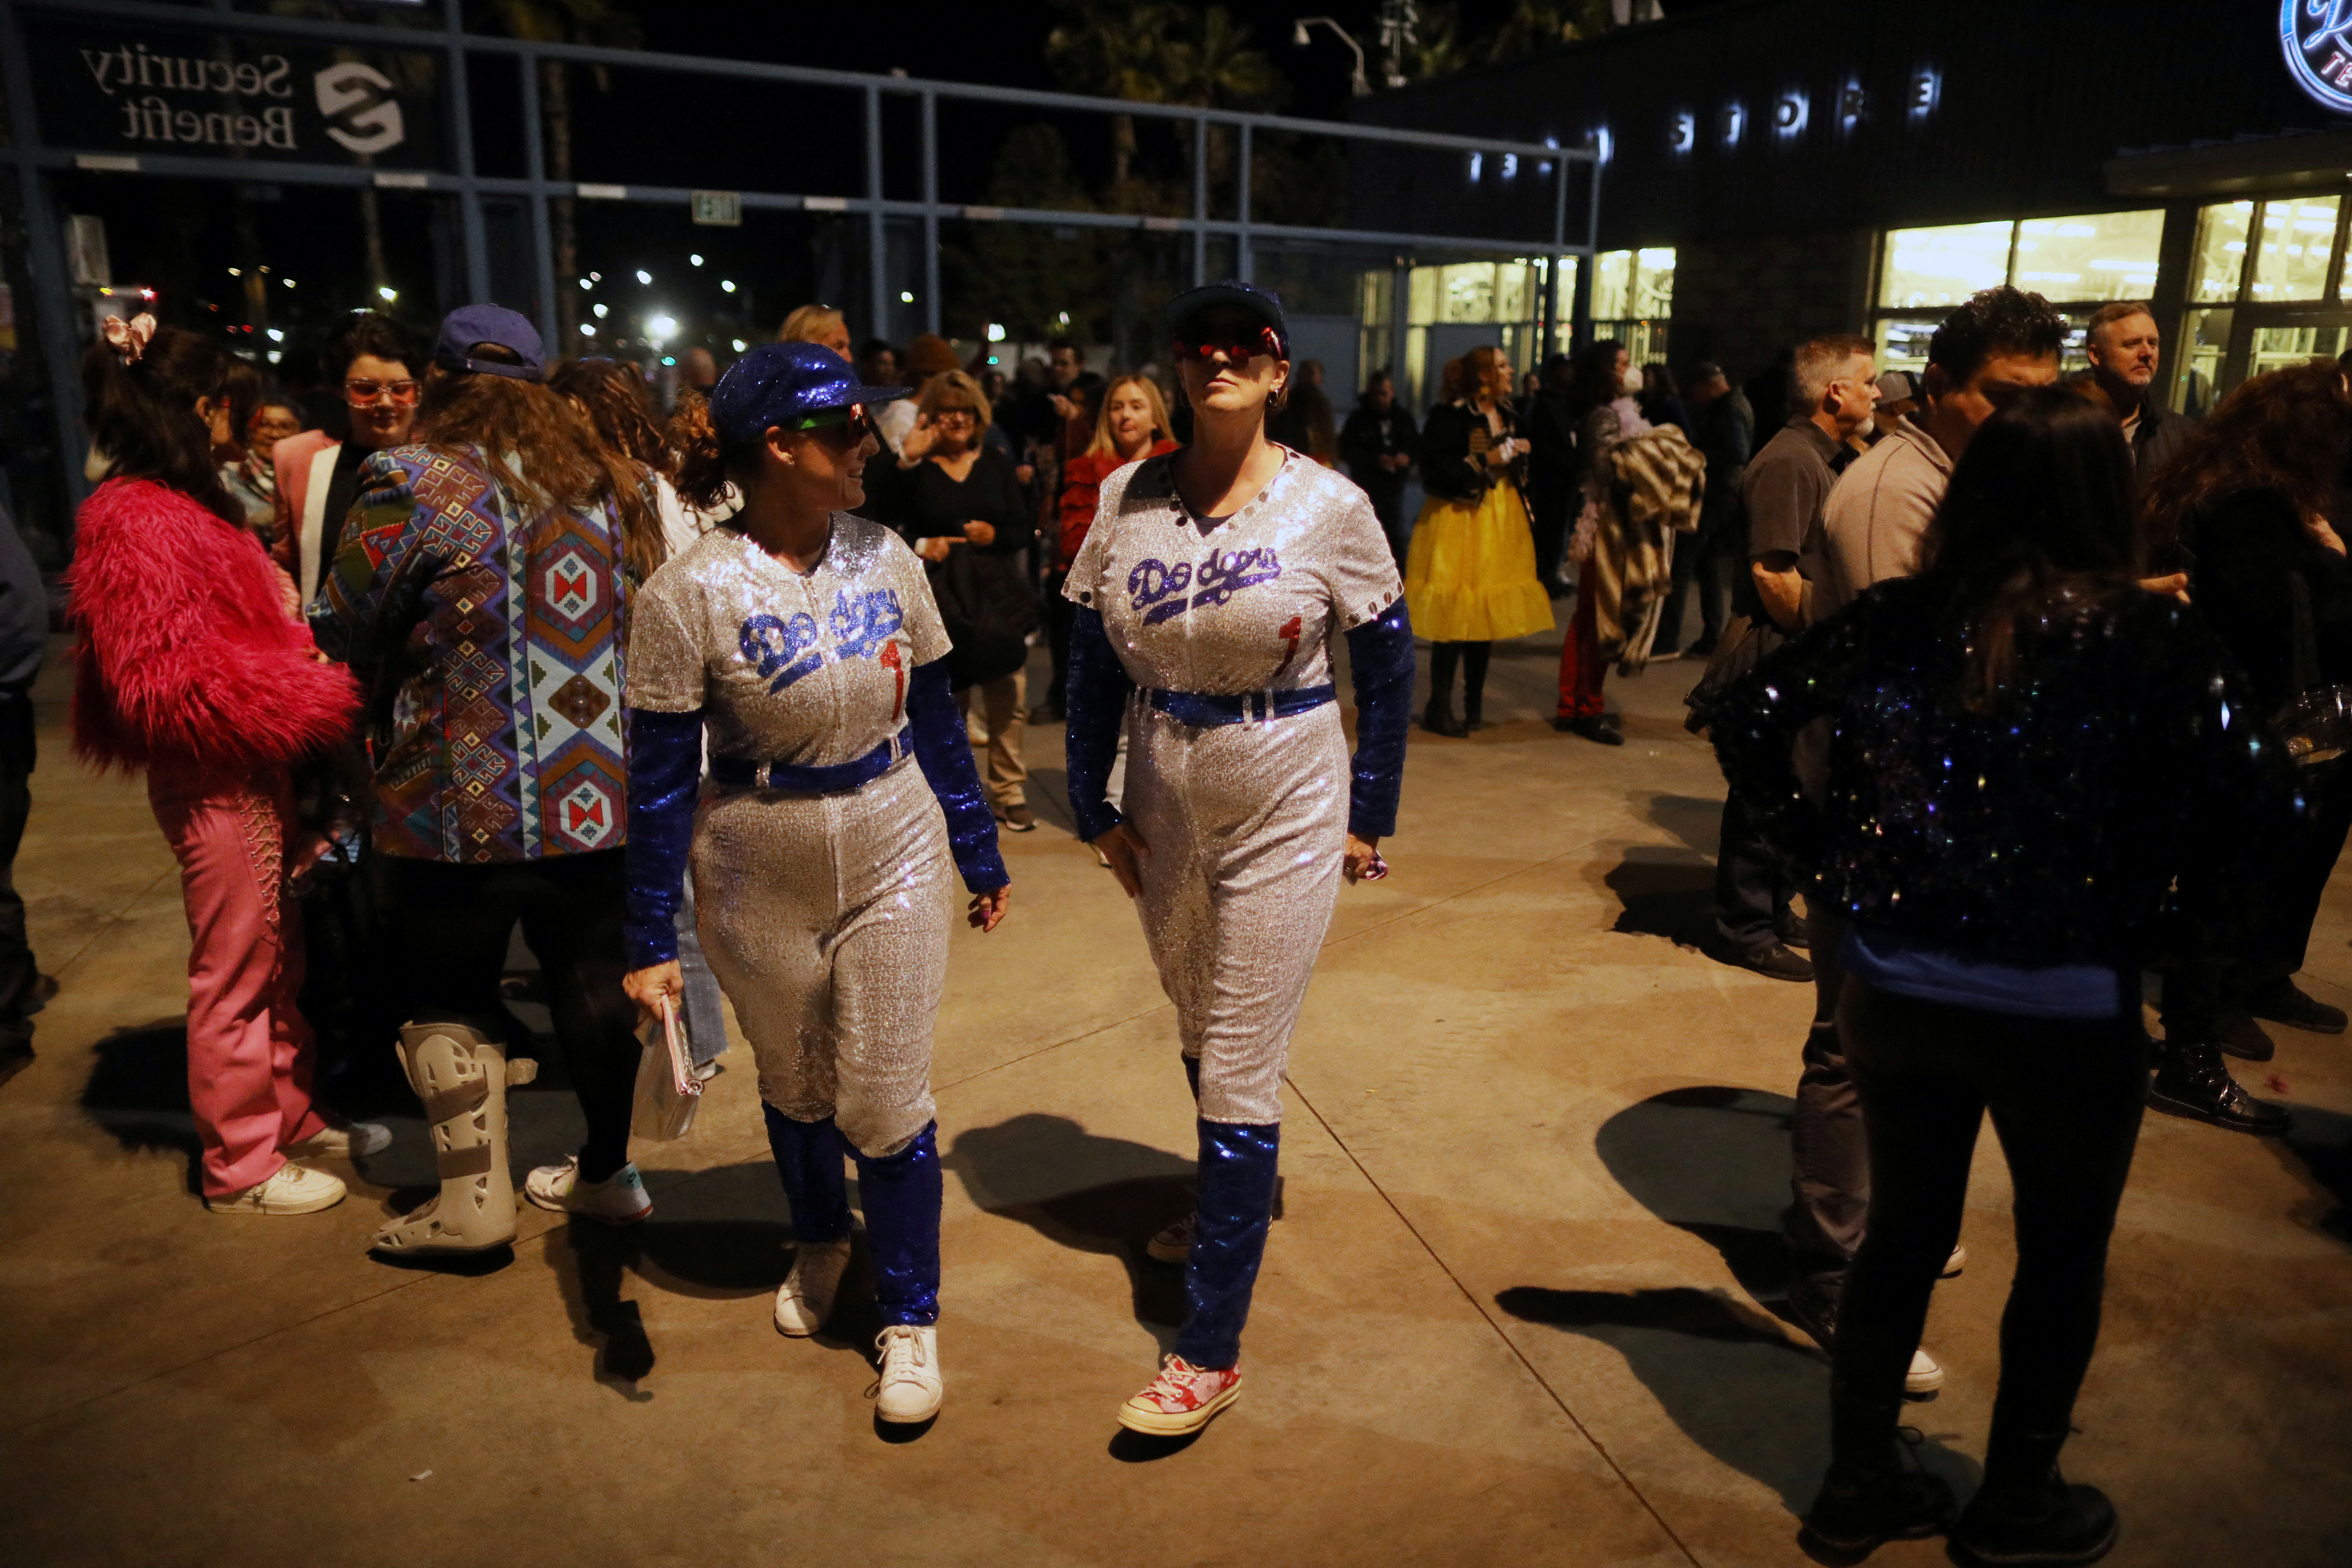 Consequence - Elton John returned to Dodger Stadium after 47 years this  weekend for his final North American concerts. He even wore a new twist on  his sequined Dodger uniform.